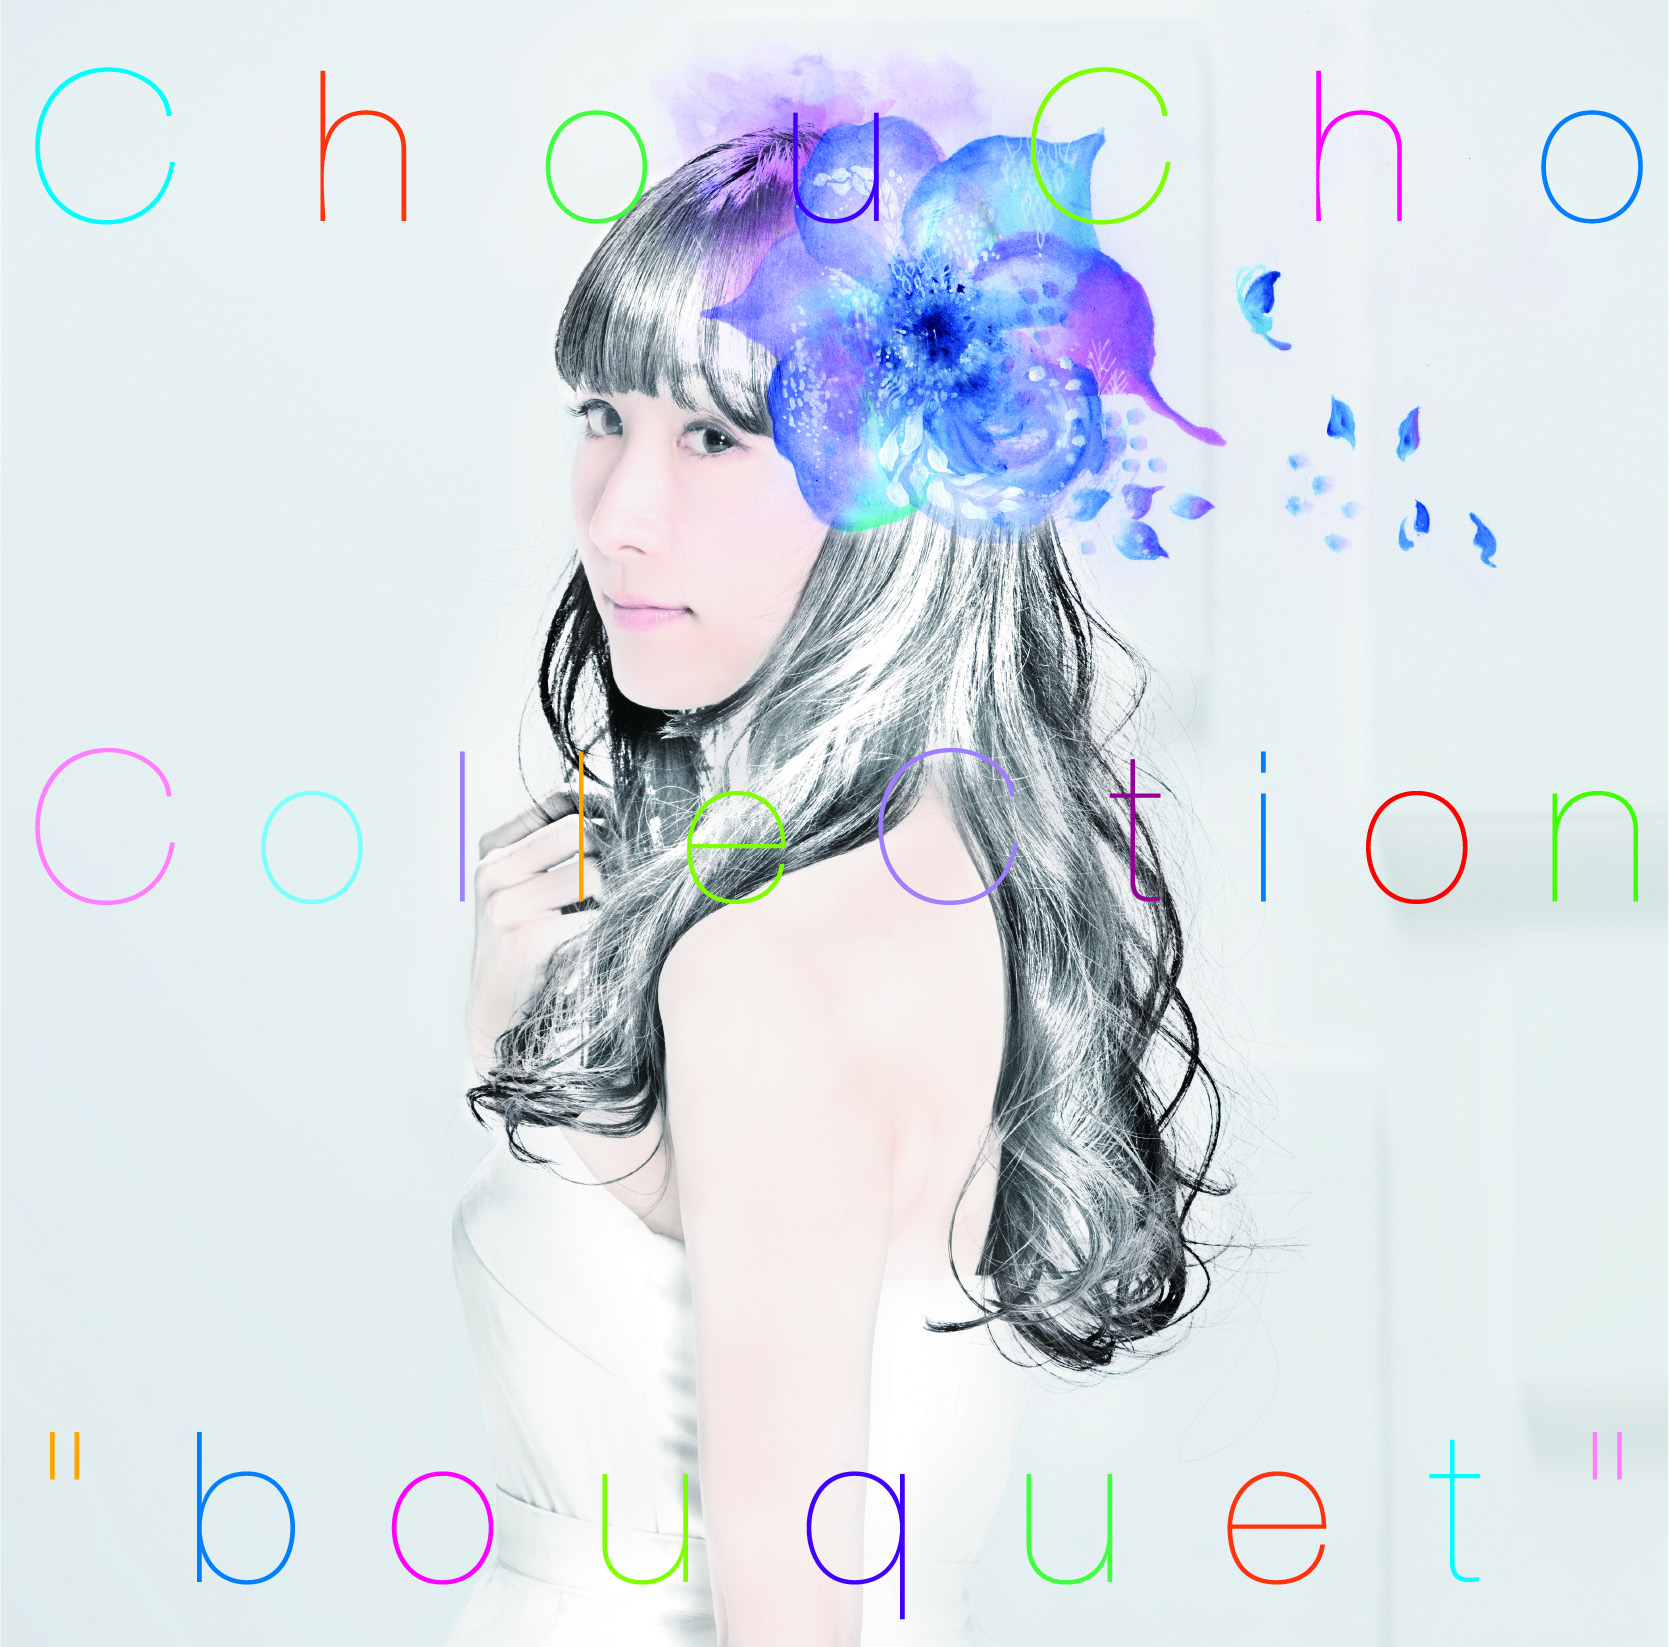 ChouCho『ChouCho ColleCtion “bouquet”』レビュー - 画像一覧（1/2）